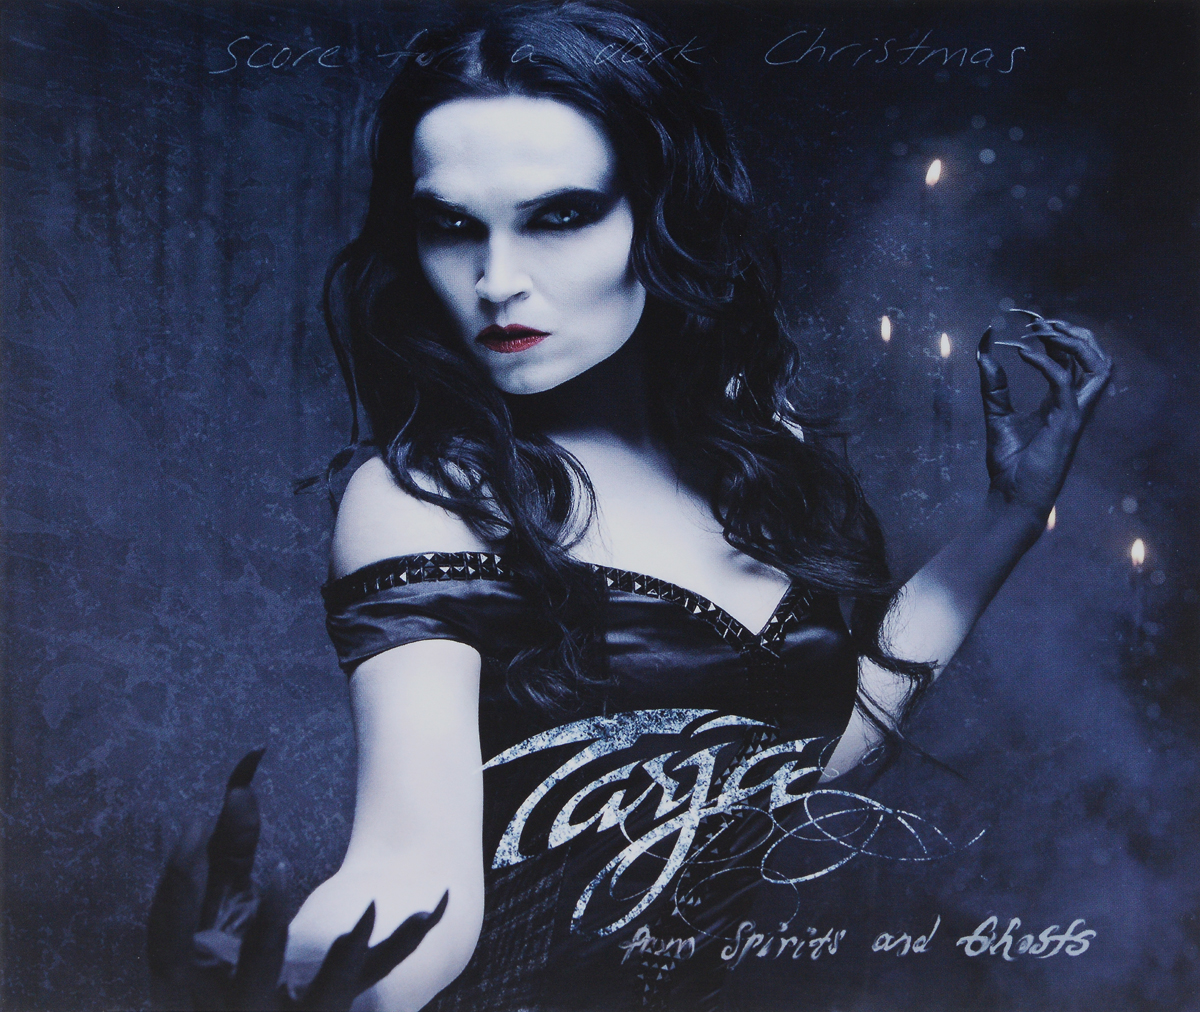 Tarja. From Spirits And Ghosts (Score For A Dark Christmas)